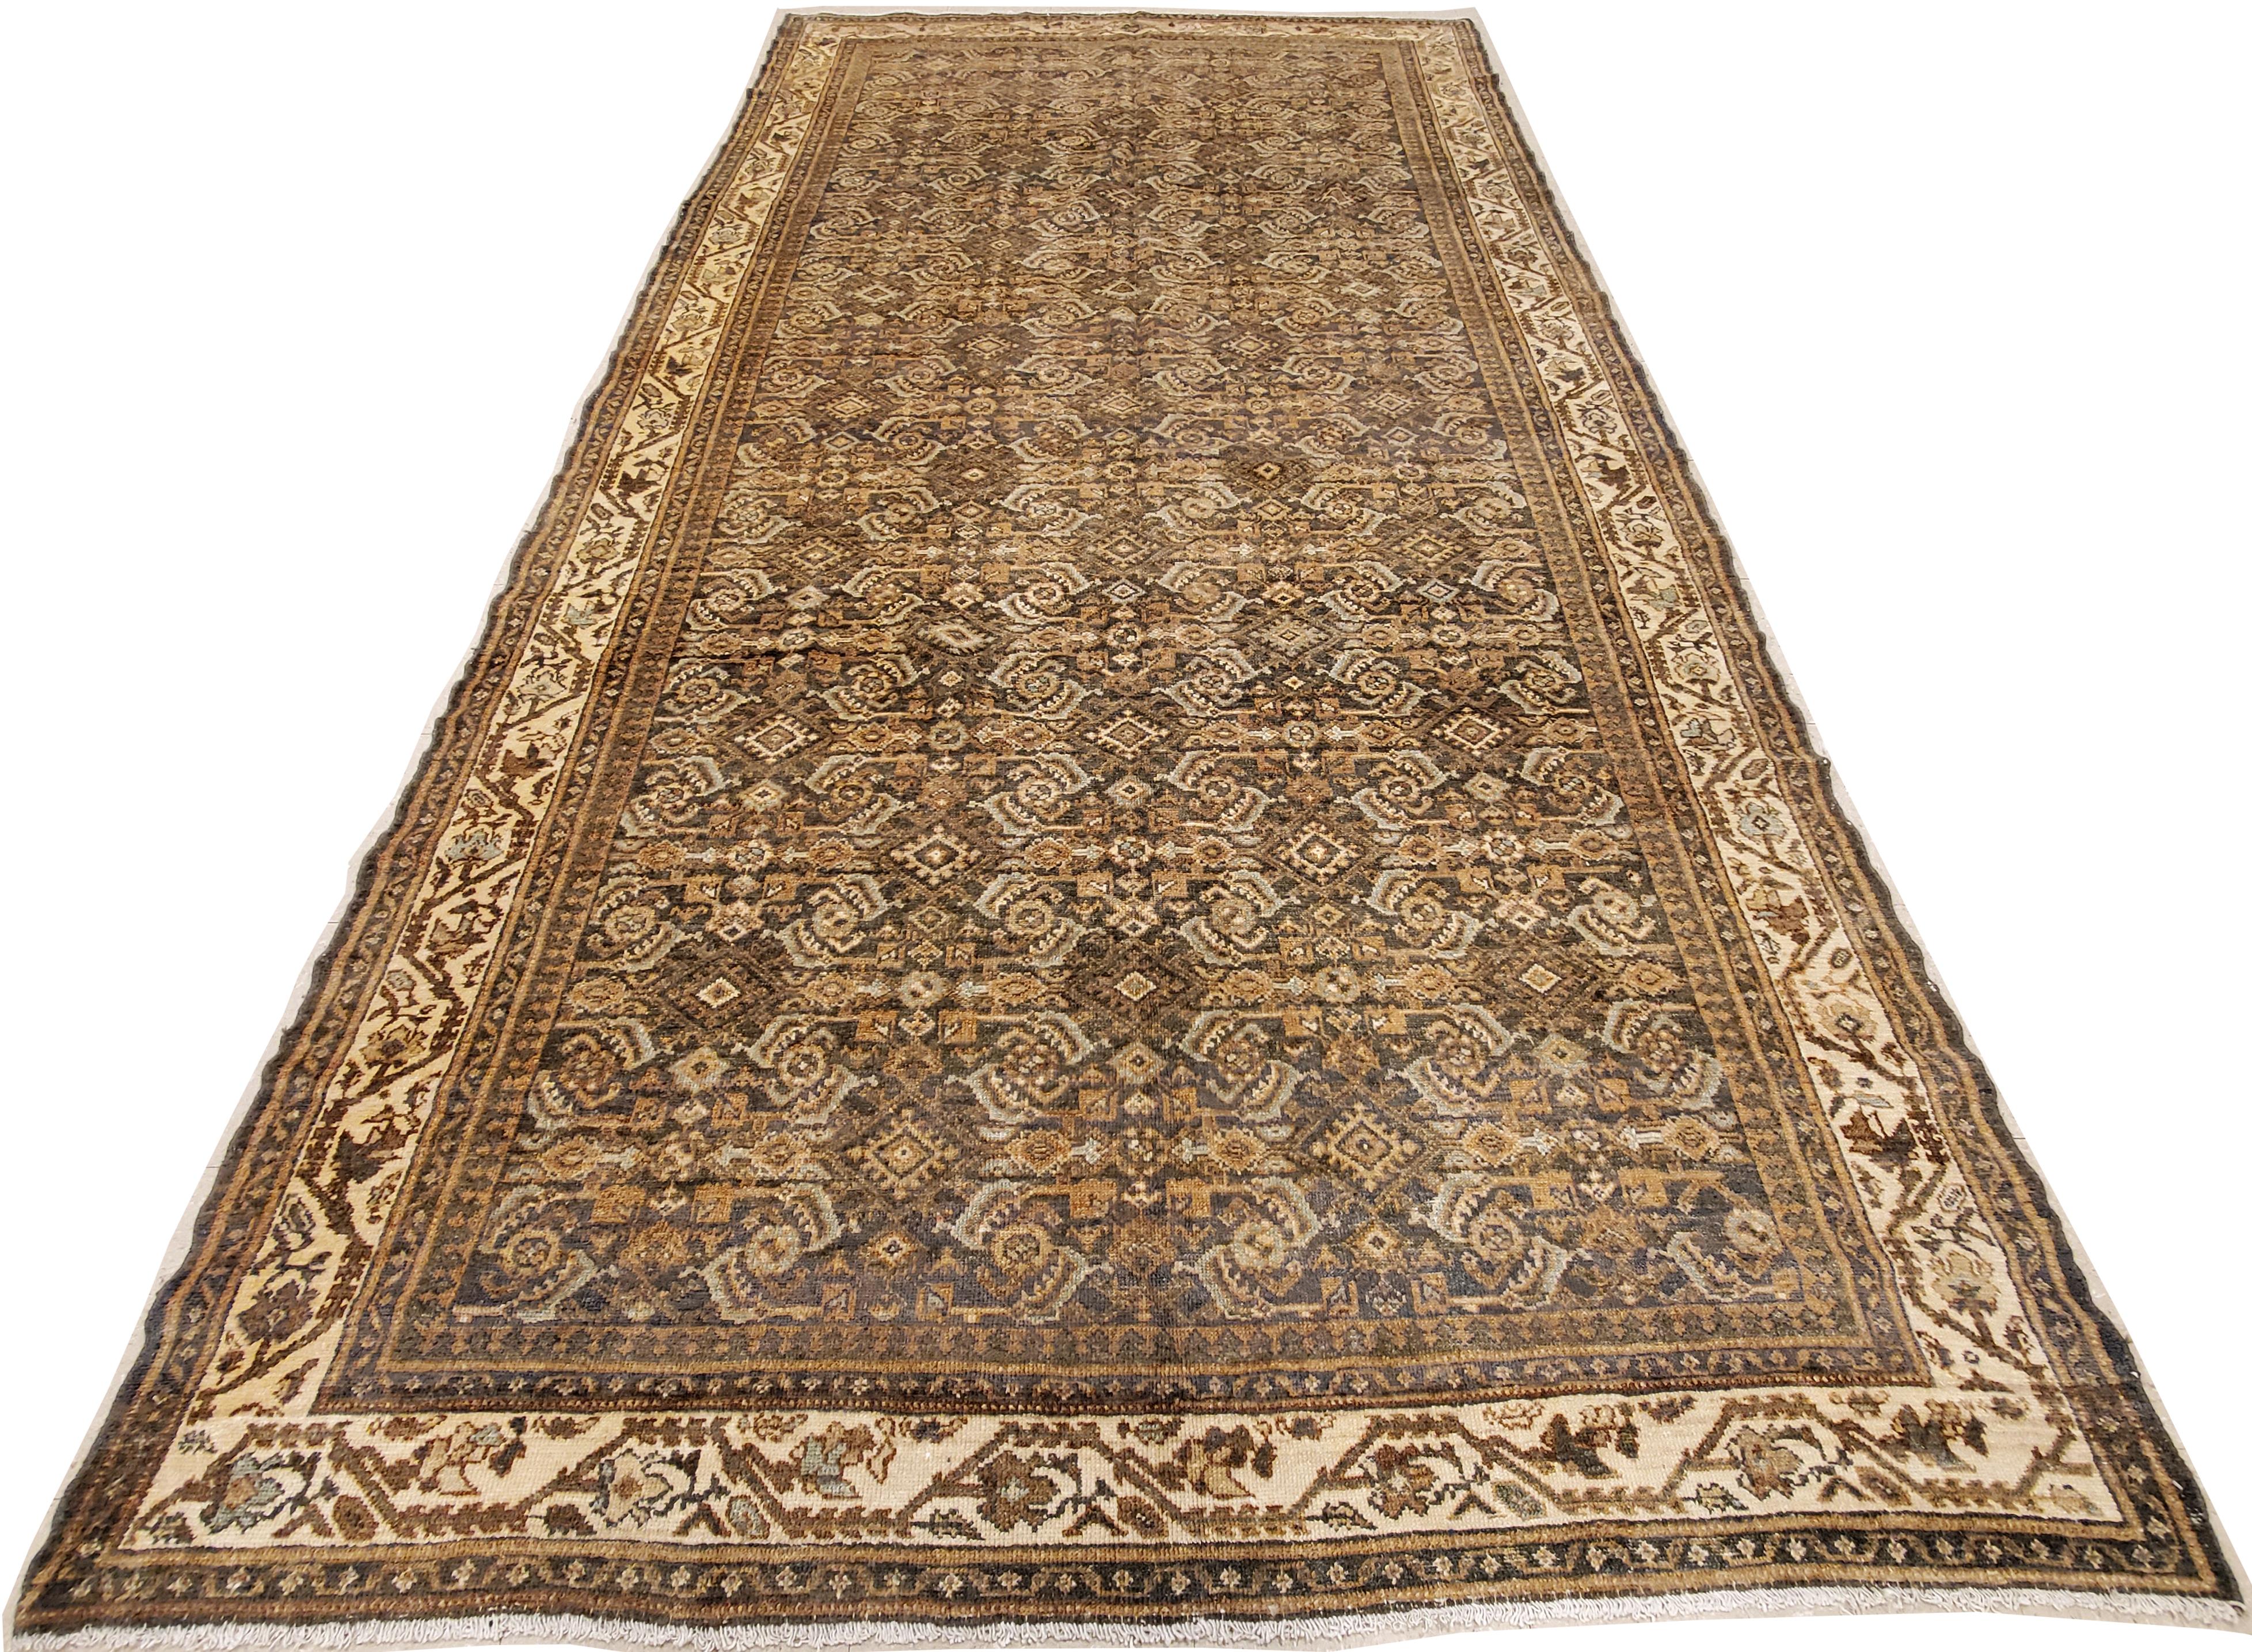 Antique Malayer Carpet, Handmade Oriental Rug, Green, Gray, Taupe, Fine Allover For Sale 2